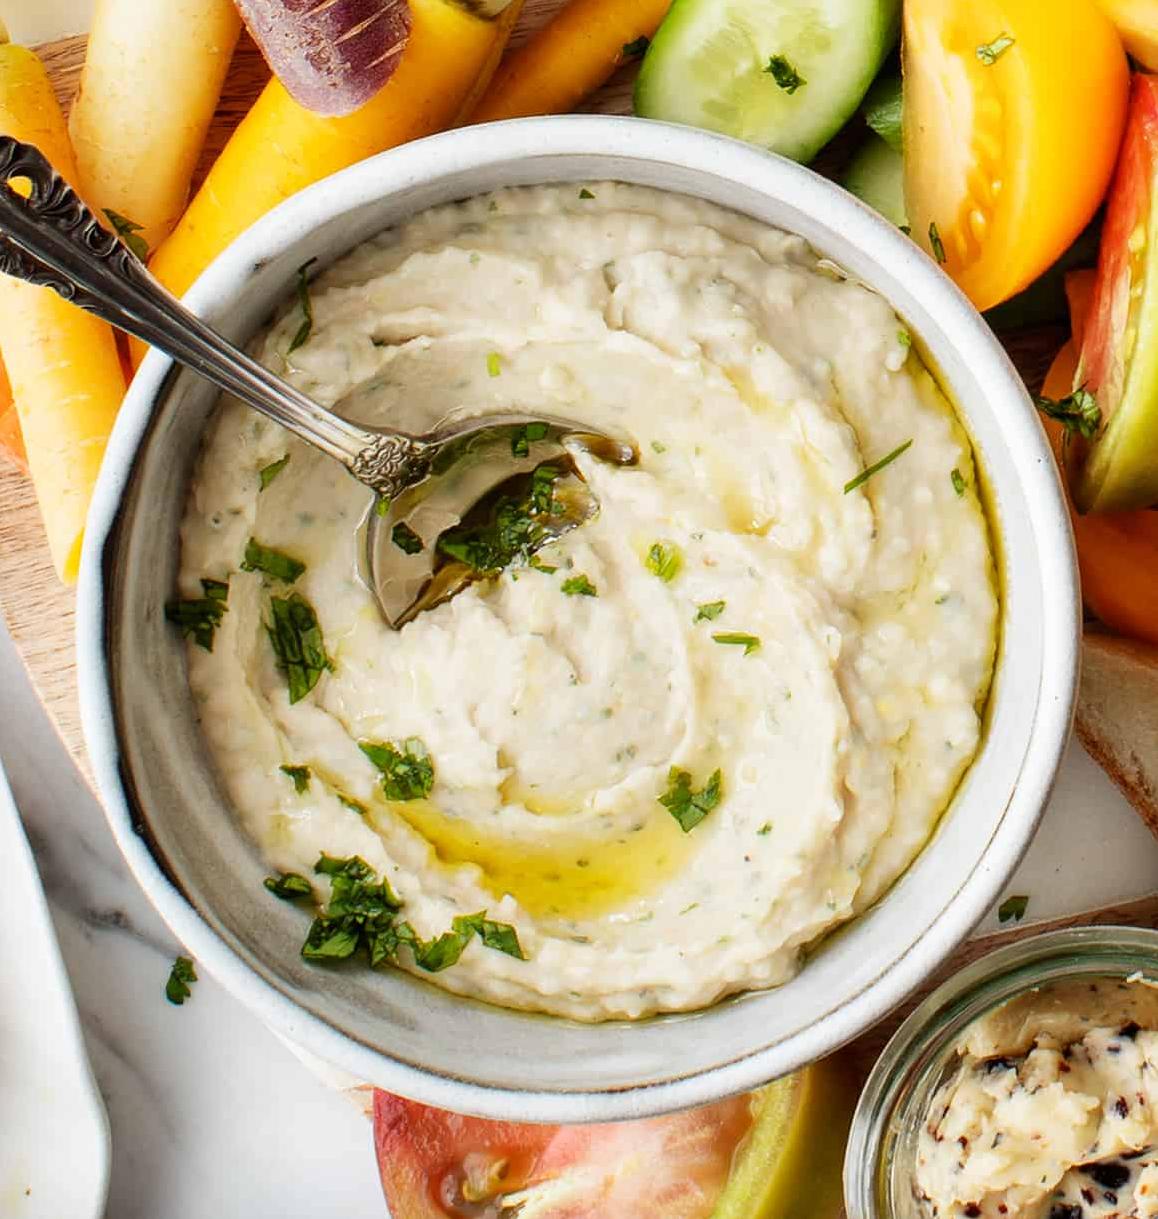  The perfect vegan condiment for dipping roasted veggies.